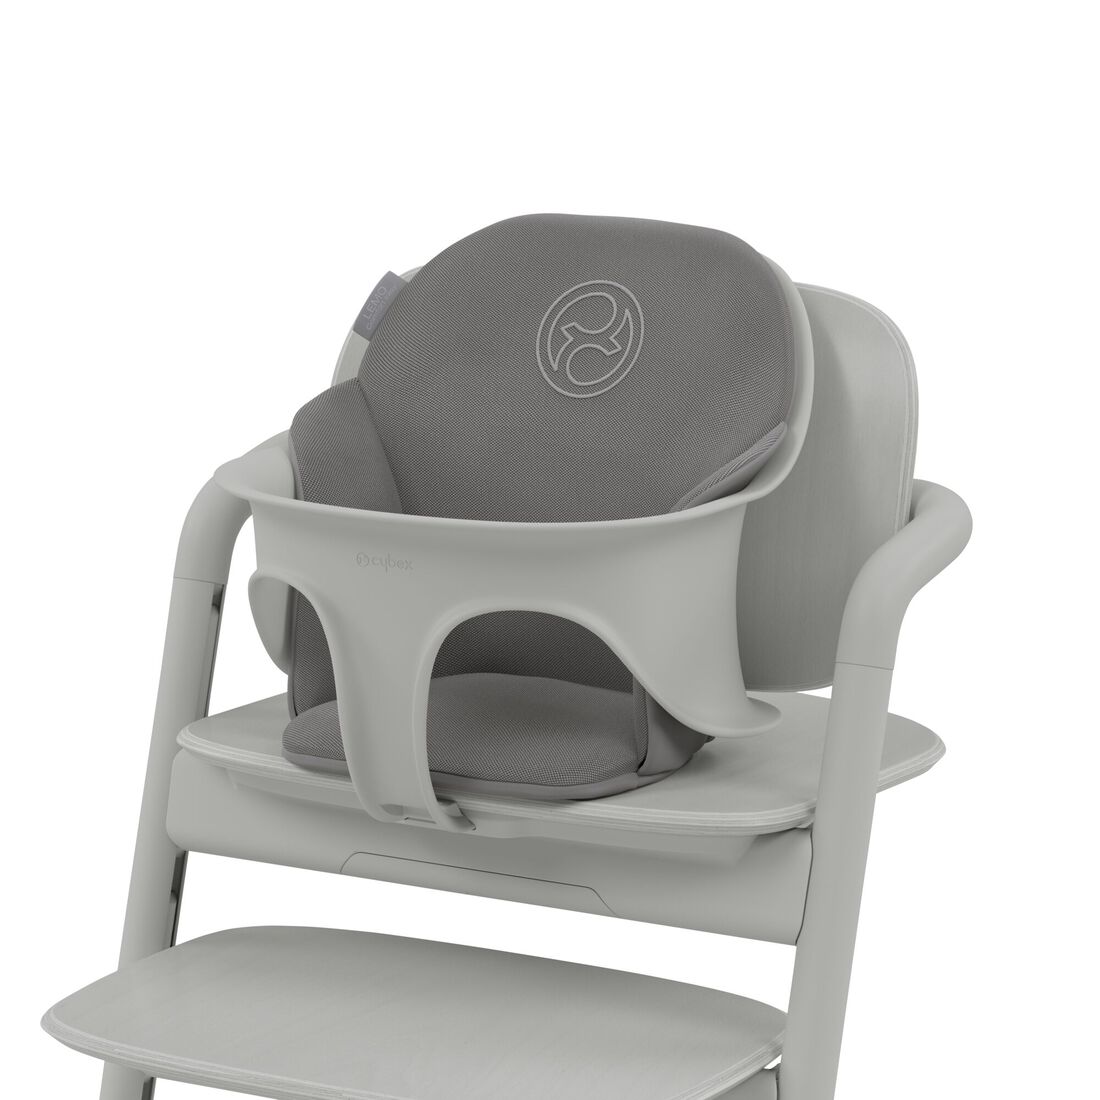 Order the Cybex Lemo Learning Tower online - Baby Plus